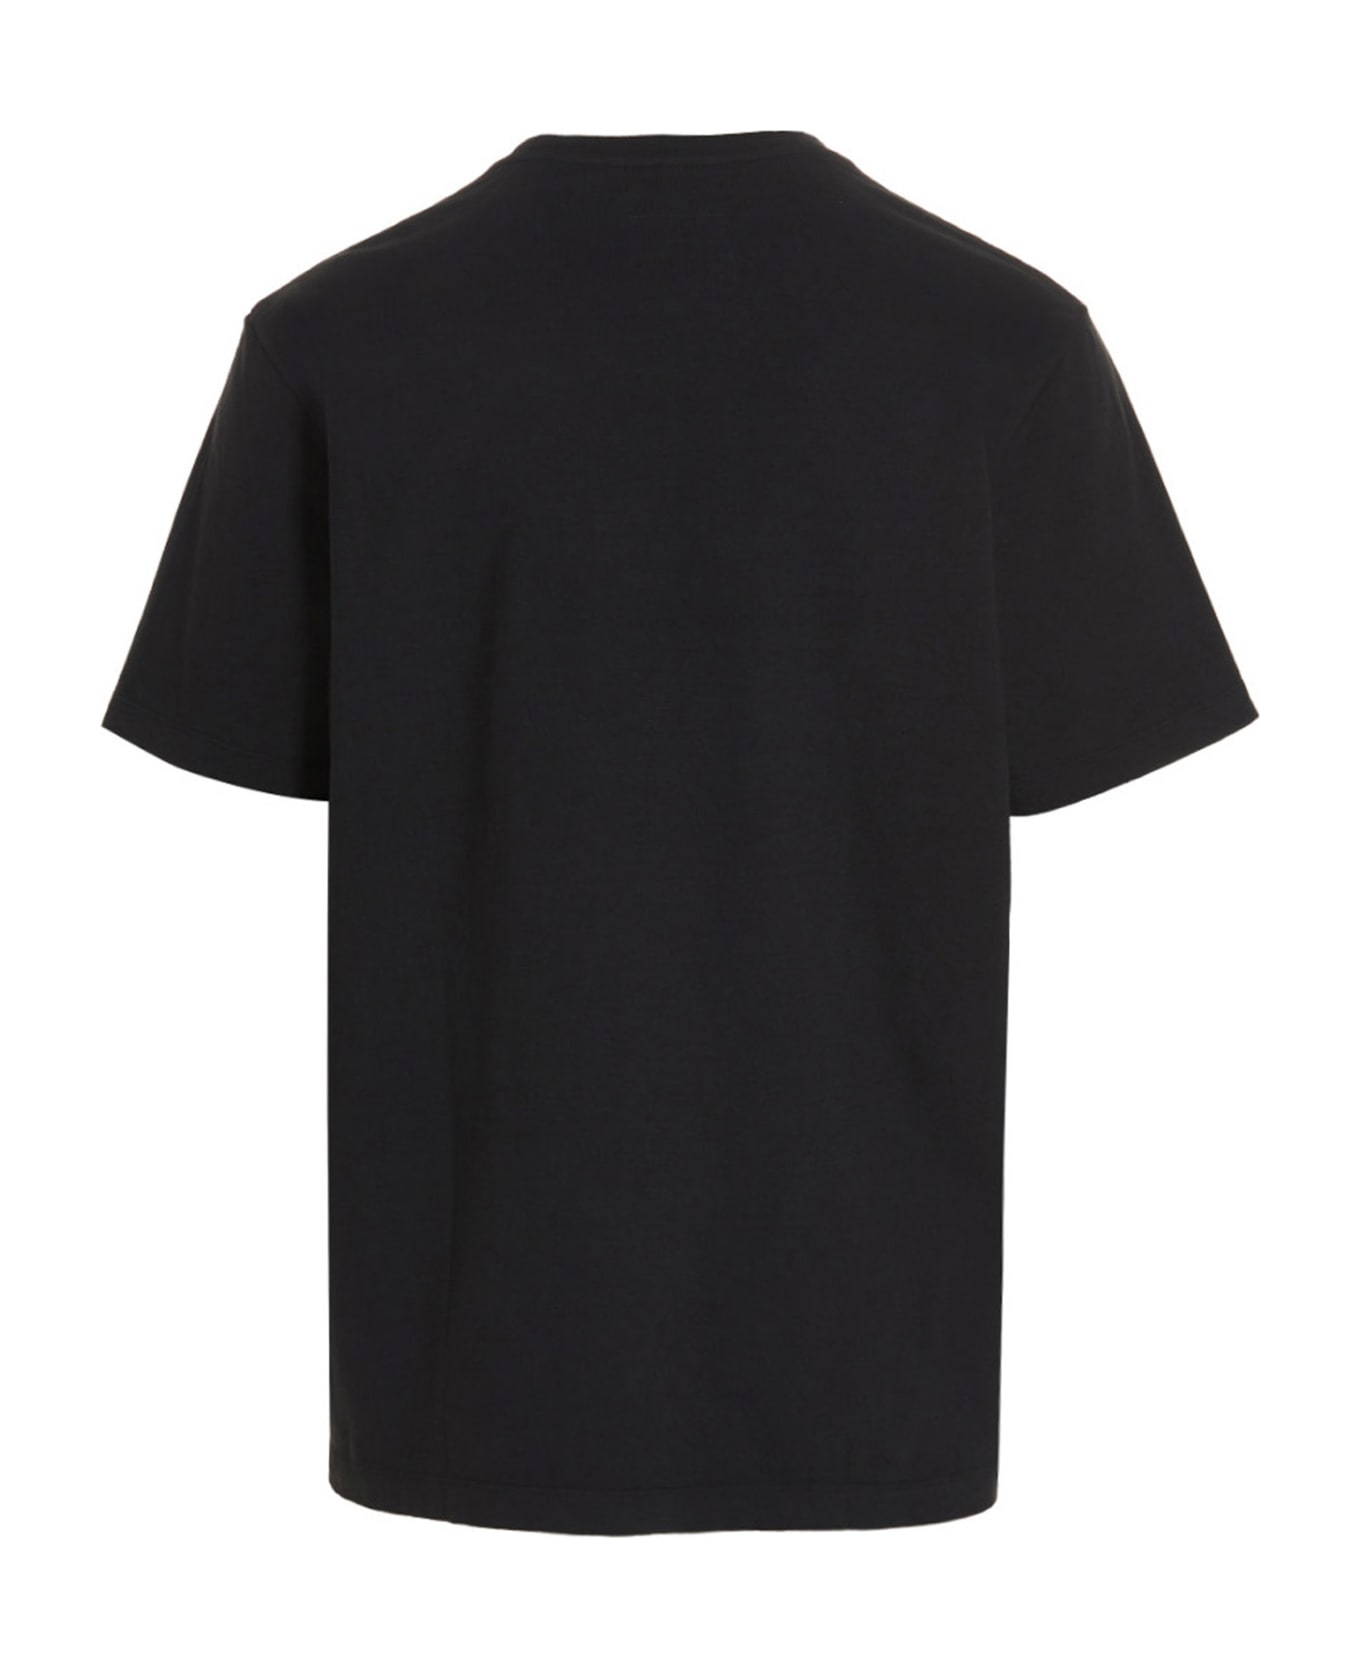 doublet 'recycled Embroidery' T-shirt - Black  